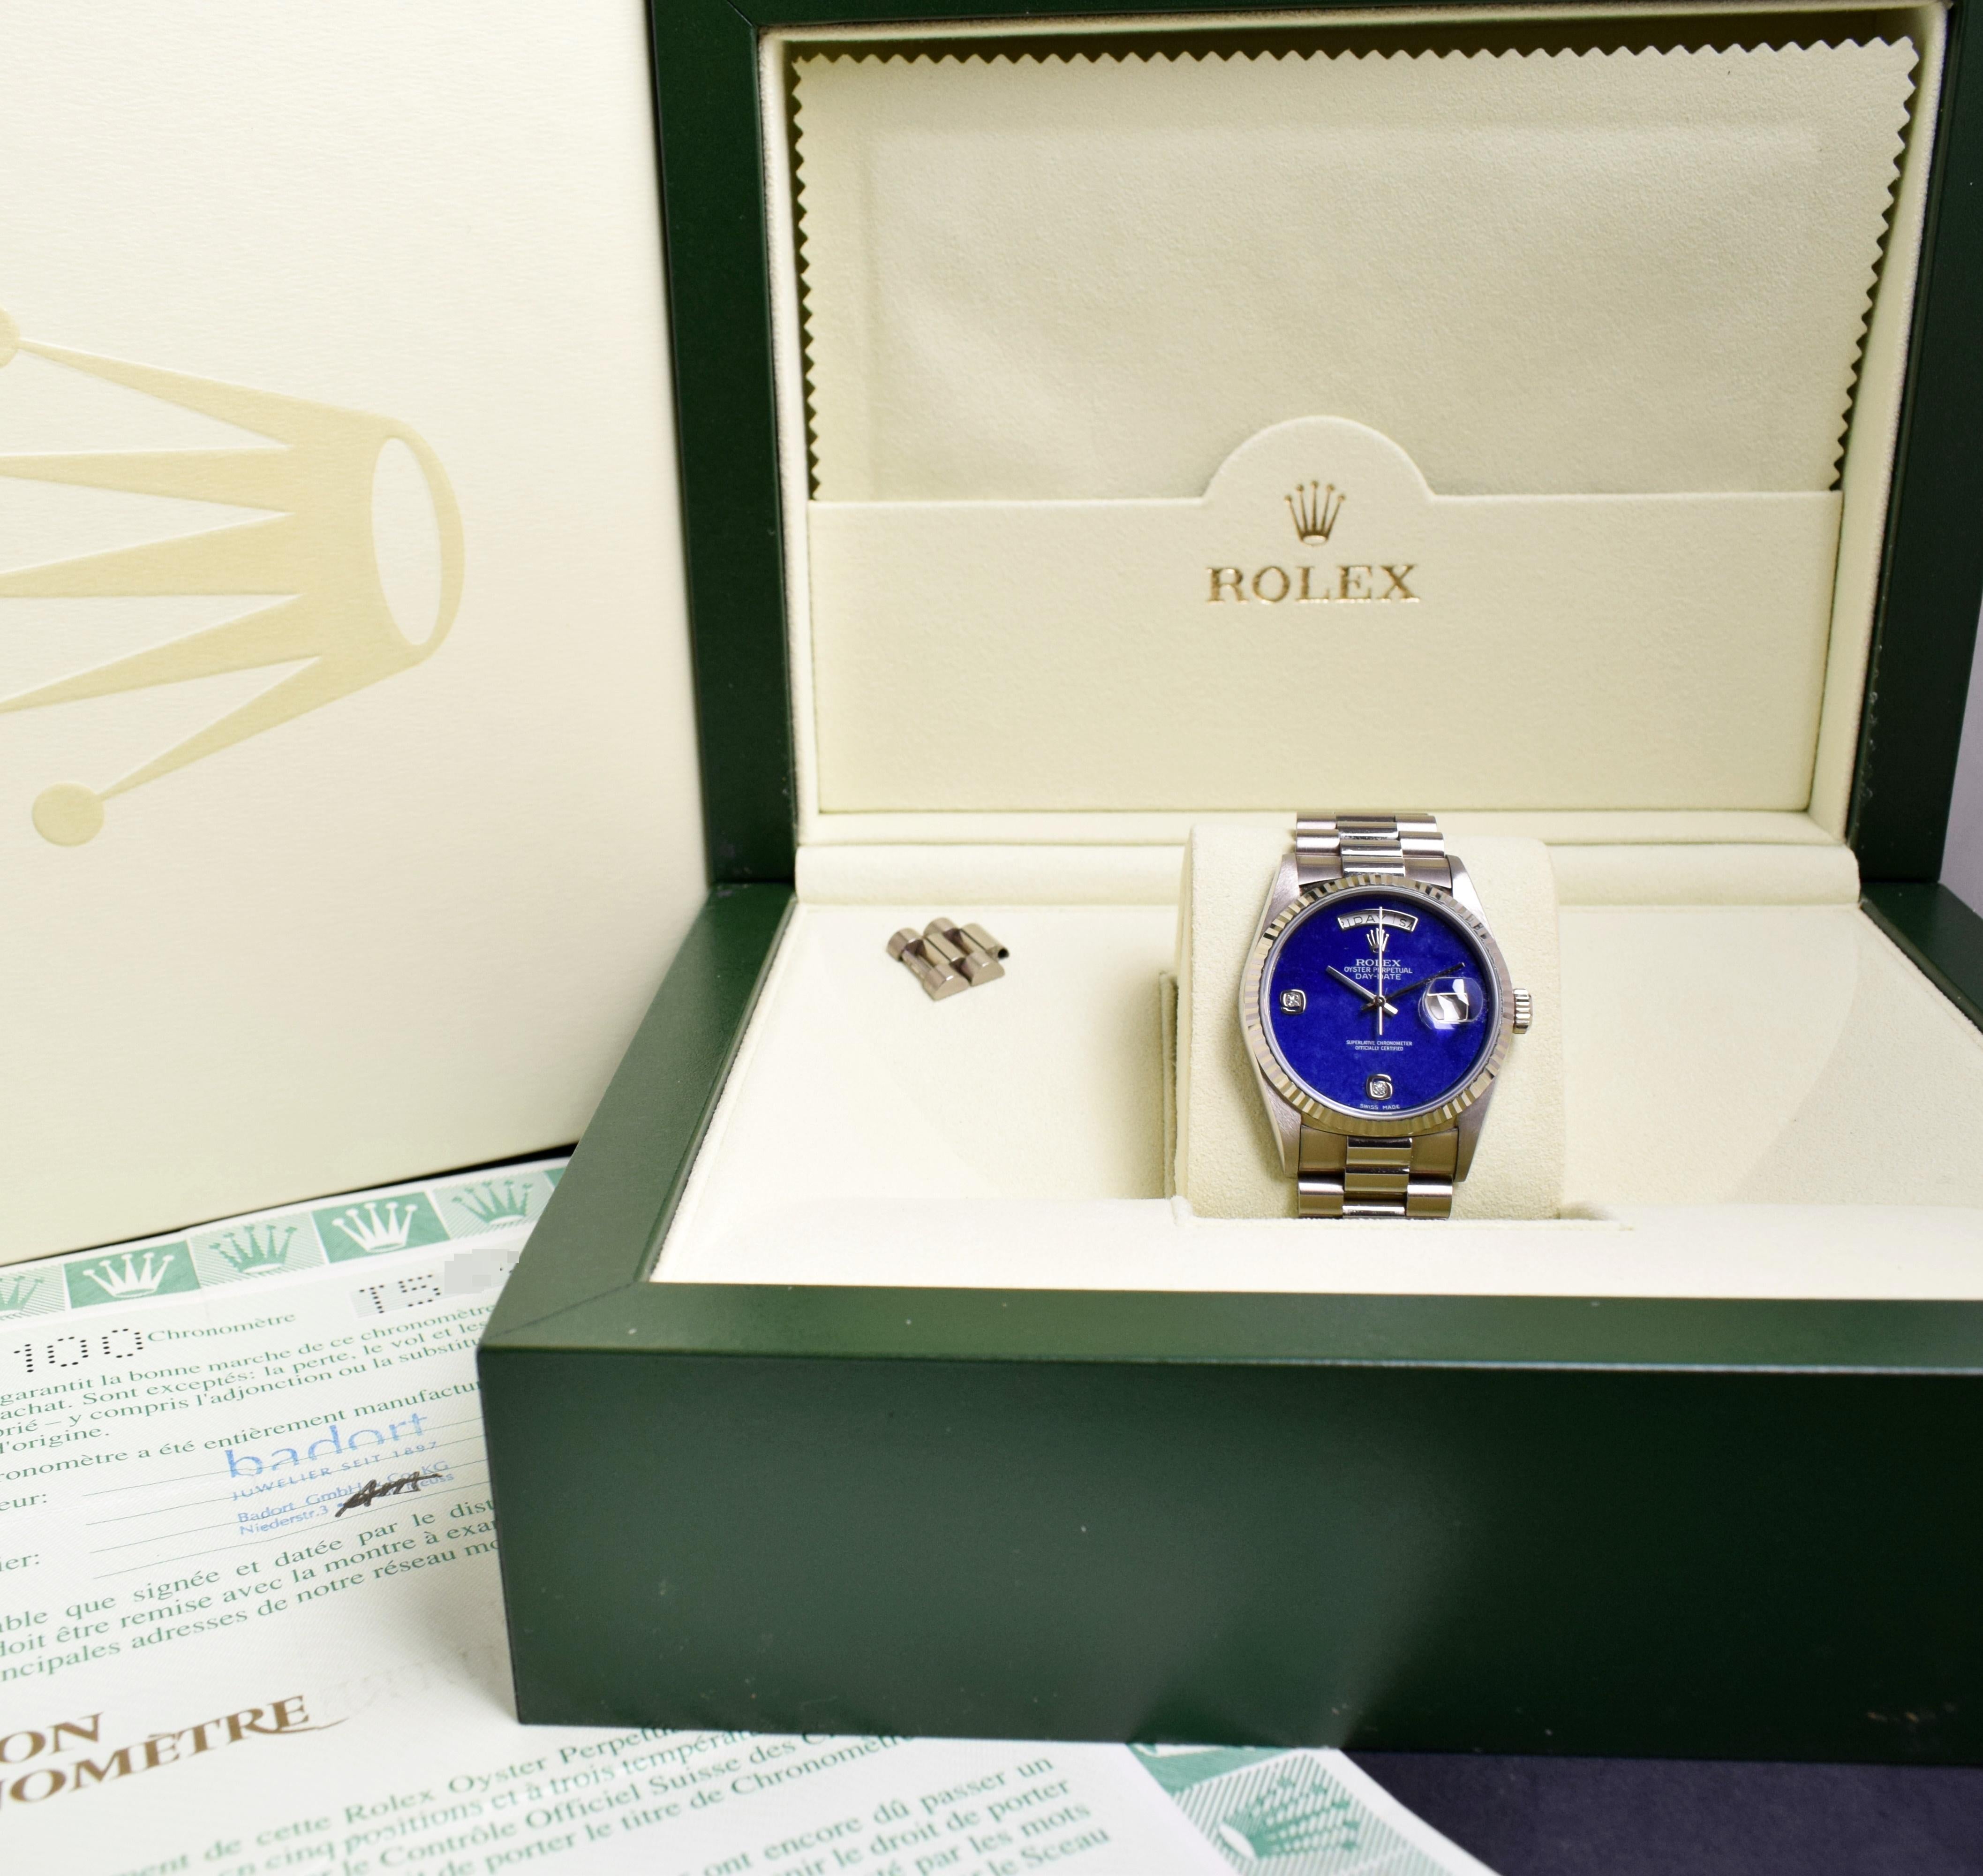 Brand: Rolex
Model: 18239
Year: 1996
Serial number: T5xxxxx
Reference: C03678
Case: 36mm without crown; Show sign of wear with slight polish from previous; inner case back stamped 18200
Dial: Excellent Condition Natural Lapis Stone Dial w/ 6 & 9